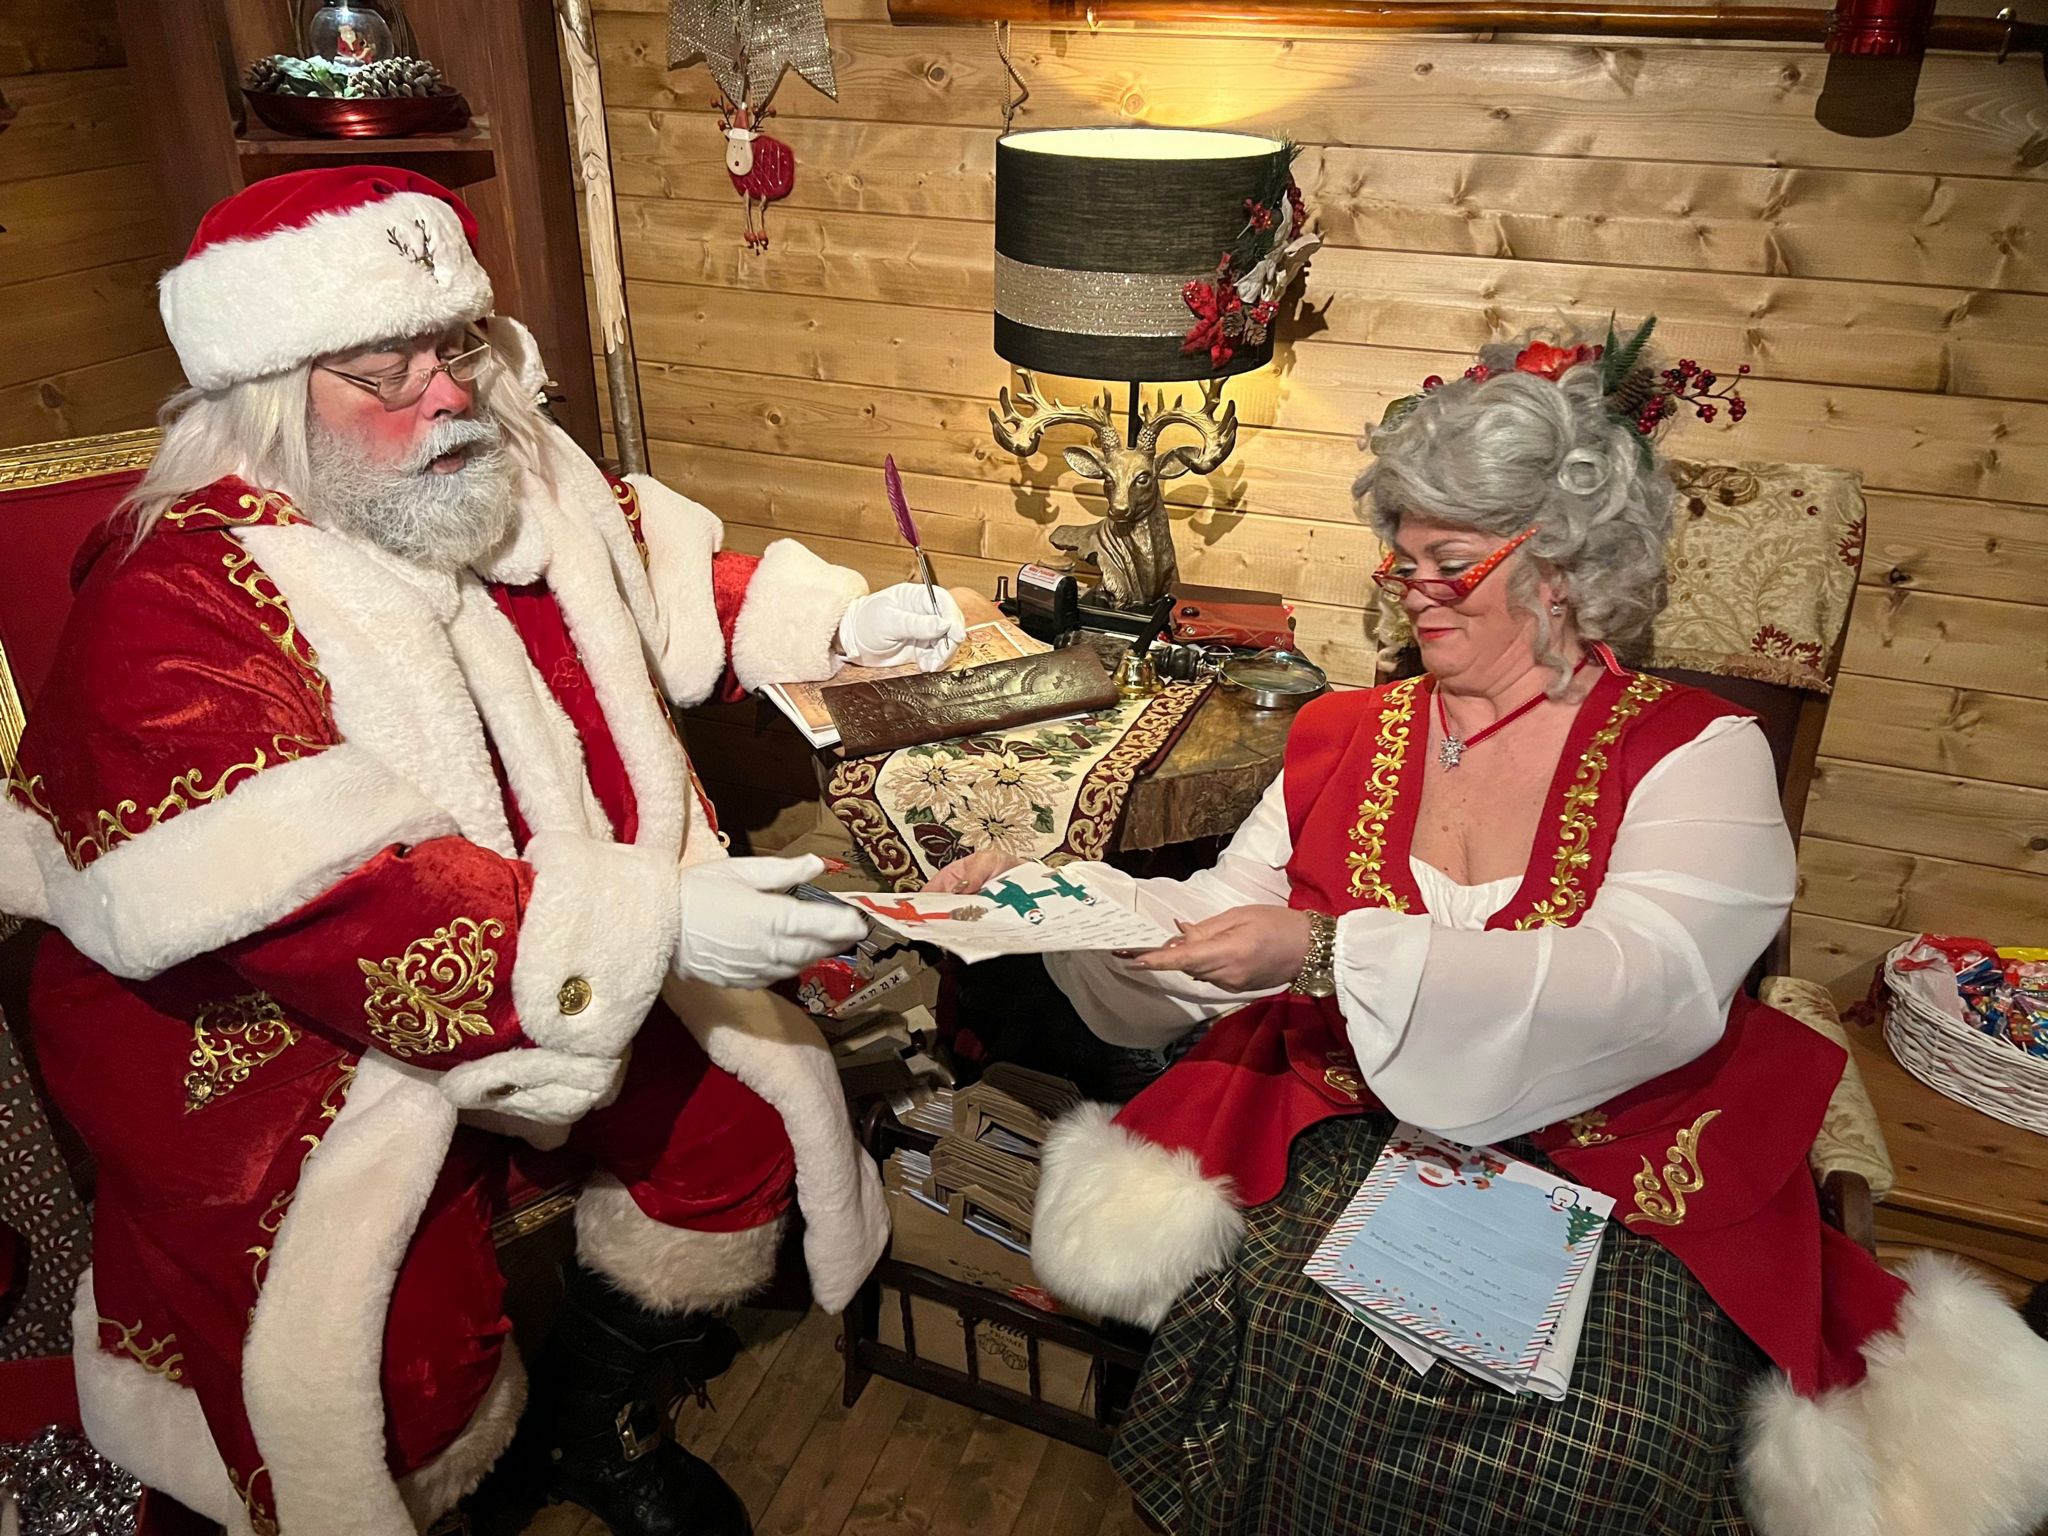 Santa Claus and Mrs Claus inside the cabin inspecting letters